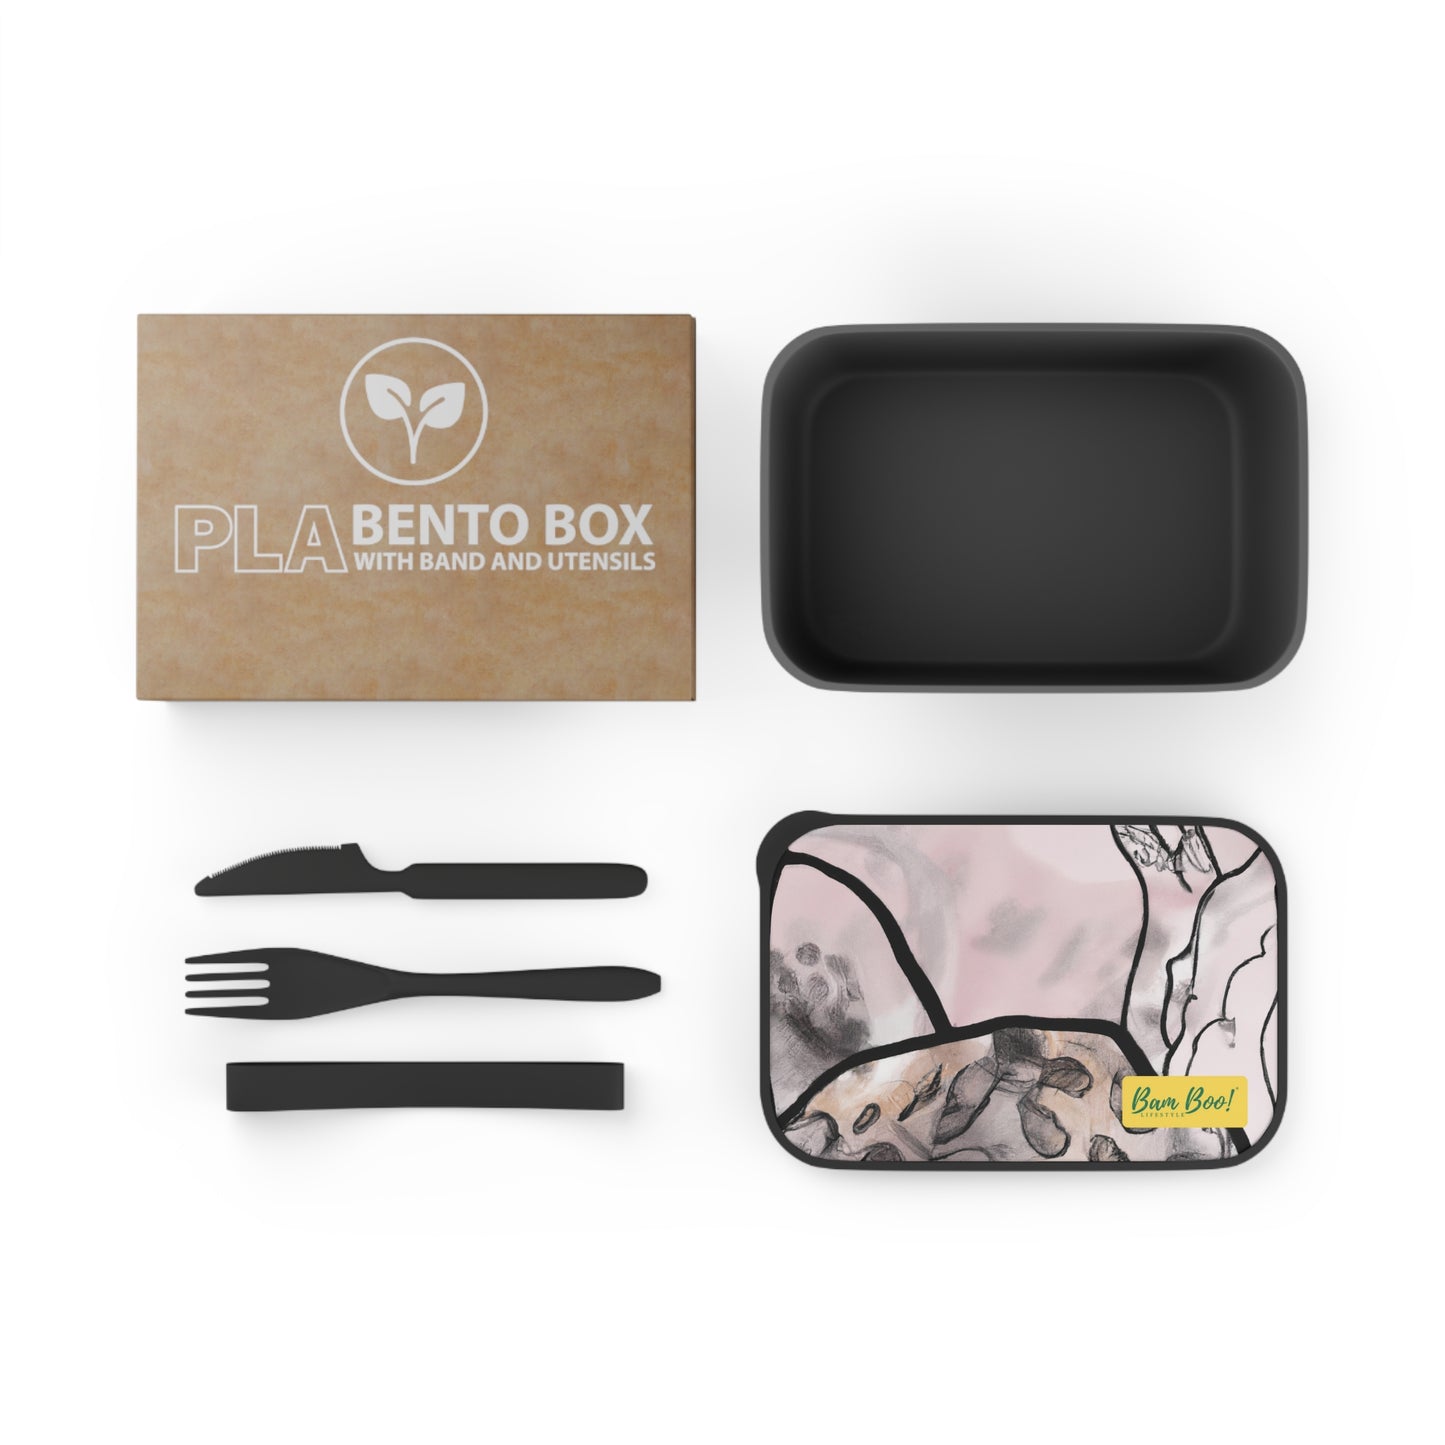 "The Natural Exuberance of Abstraction" - Bam Boo! Lifestyle Eco-friendly PLA Bento Box with Band and Utensils